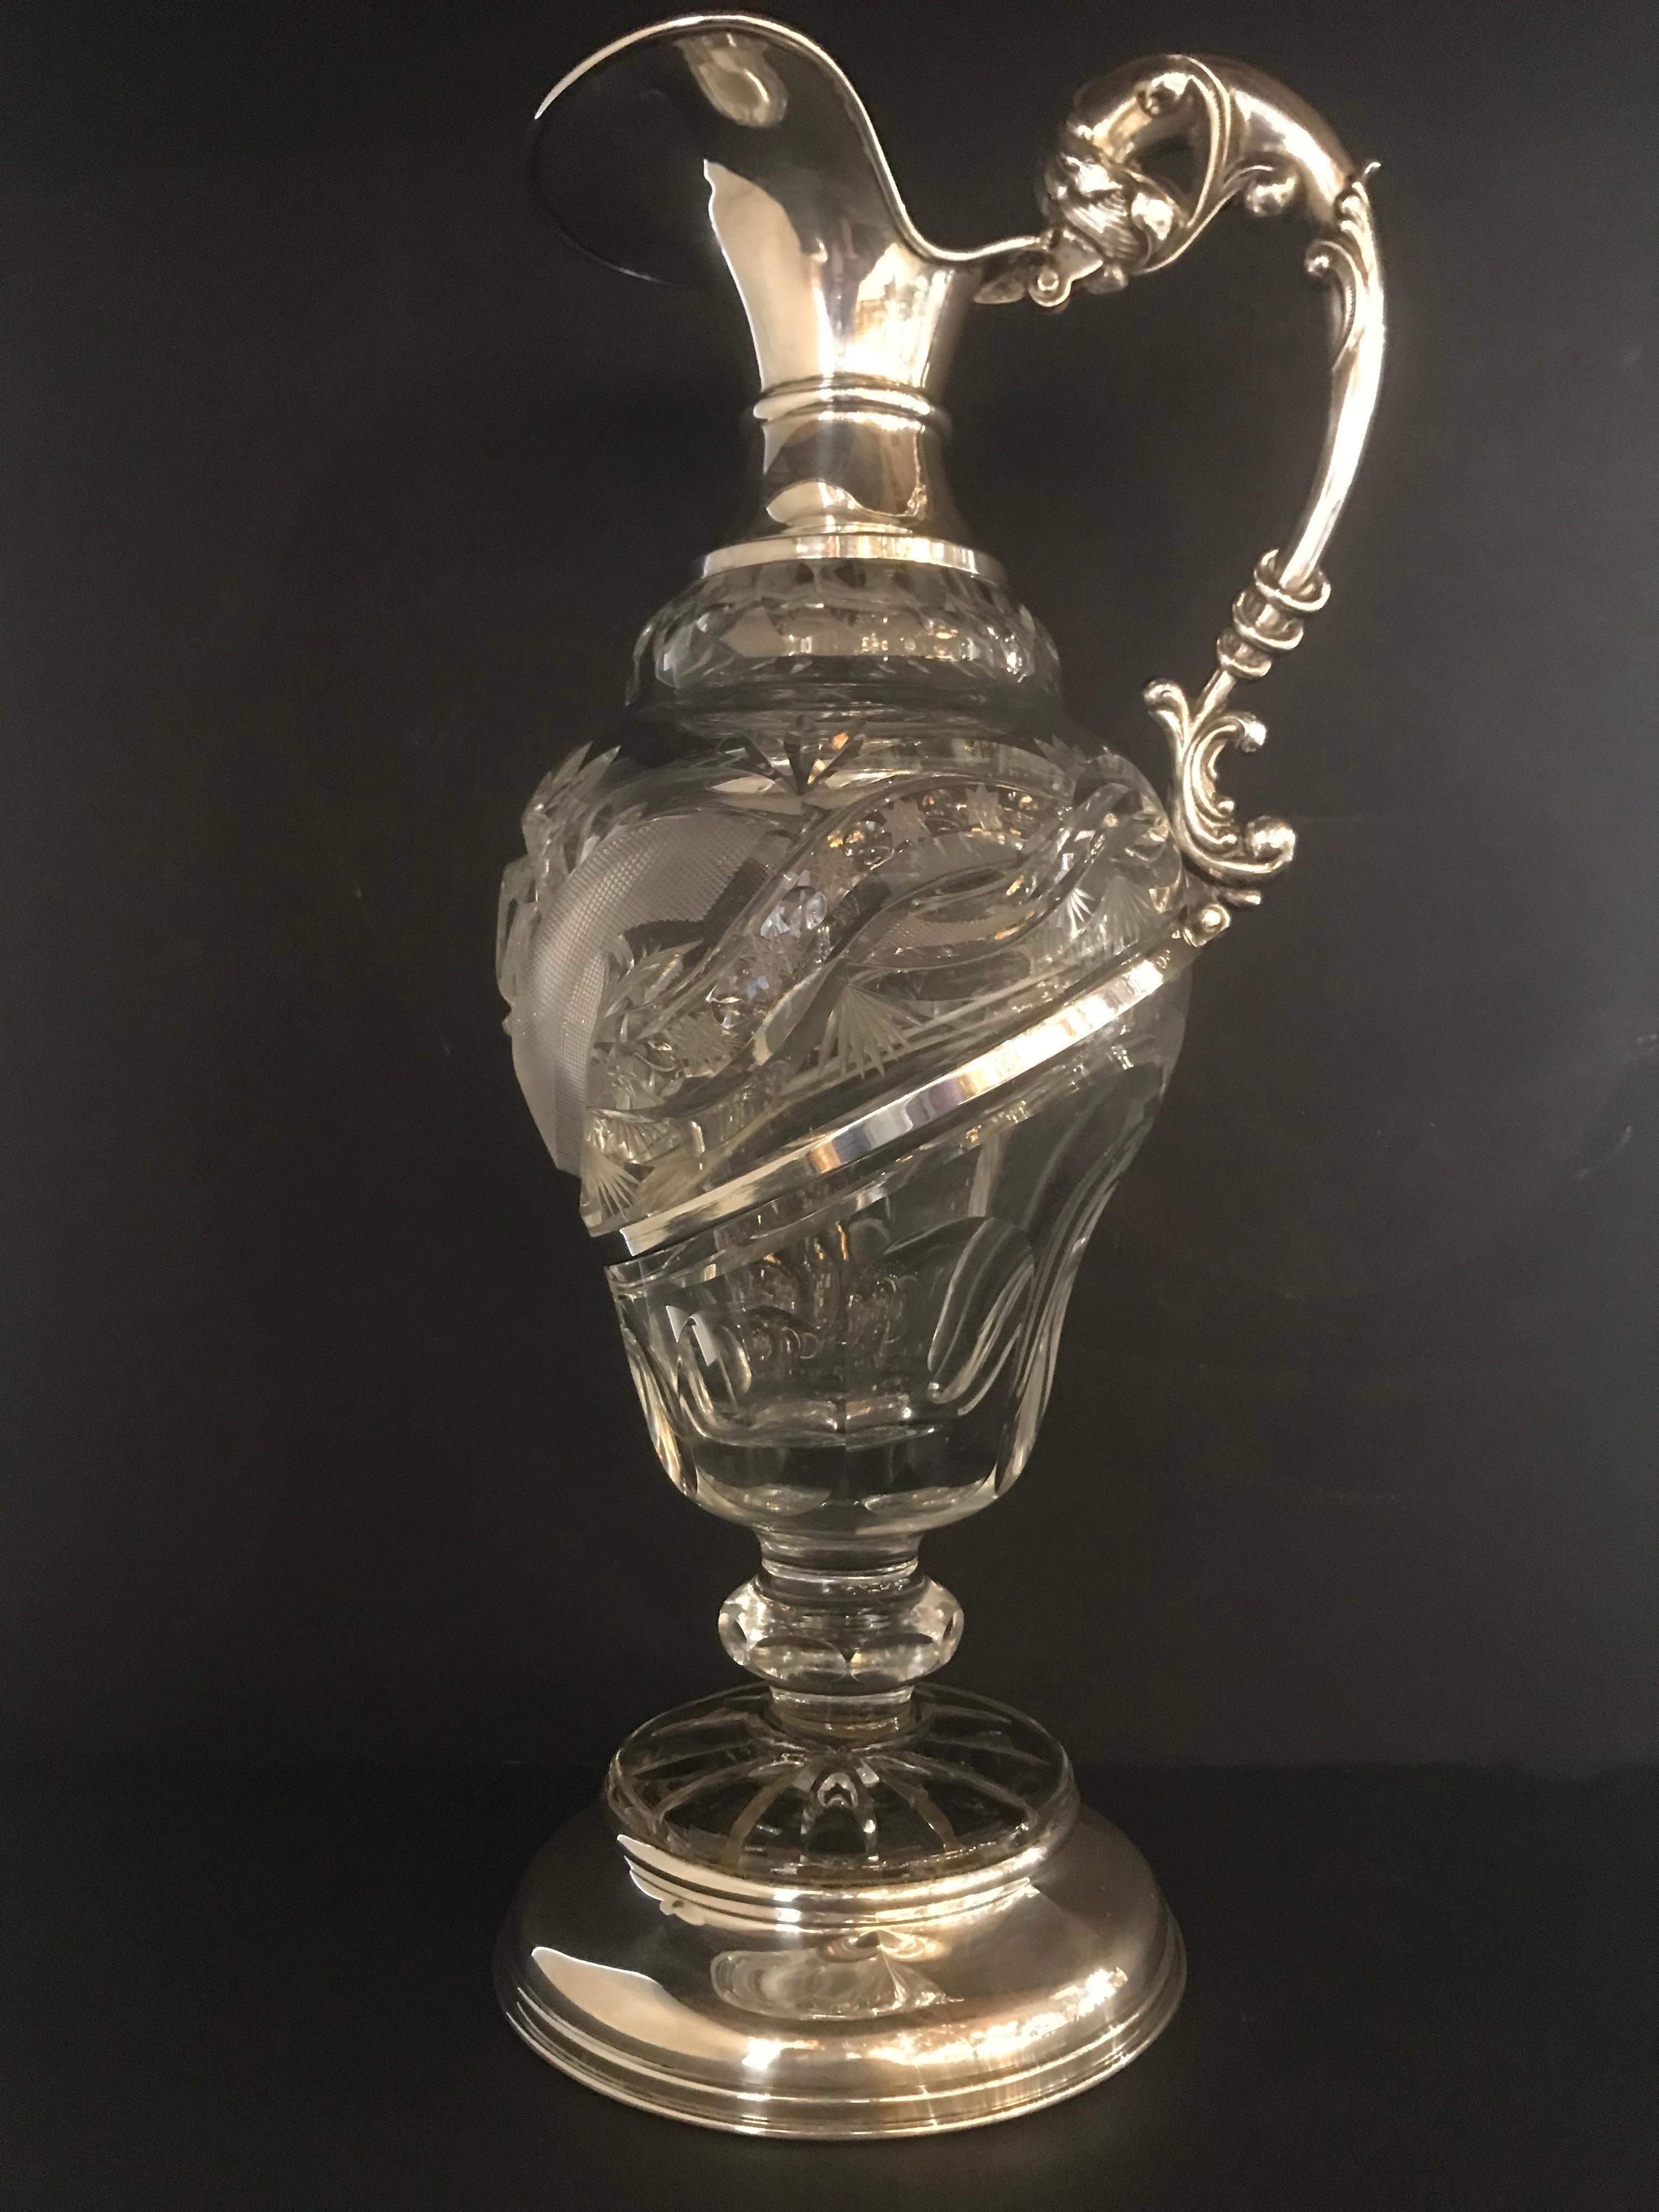 A magnificent crystal & silver decanter. France, circa 1900.
Dimensions: height 14 1/2